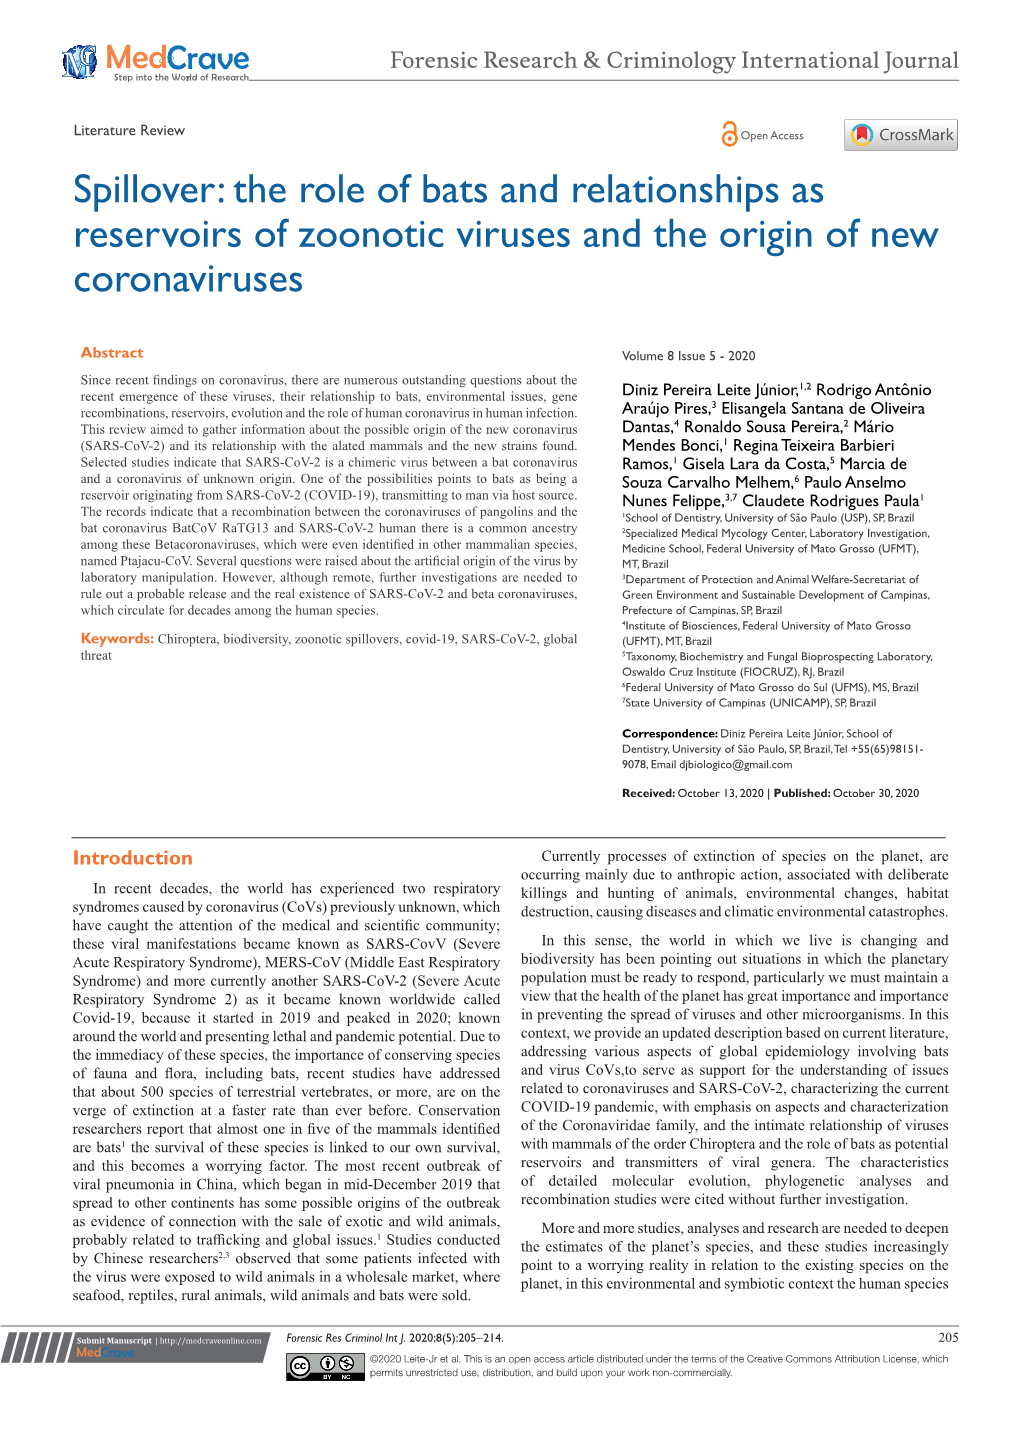 The Role of Bats and Relationships As Reservoirs of Zoonotic Viruses and the Origin of New Coronaviruses